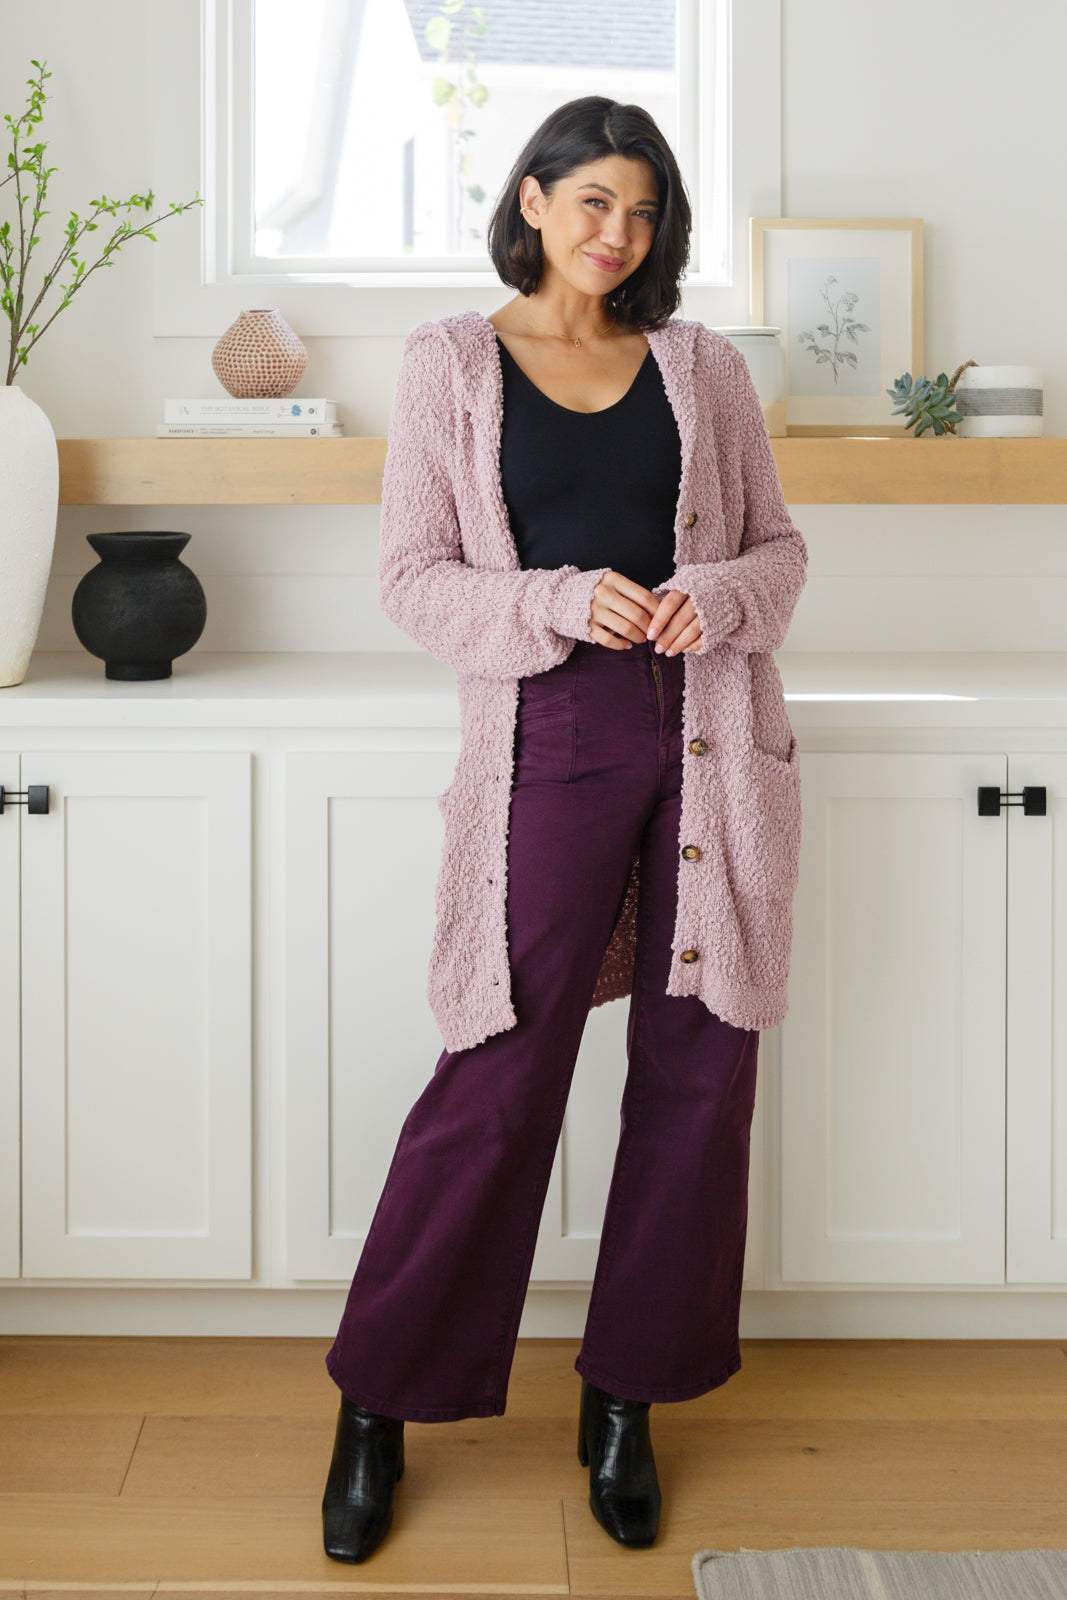 Soft Wisteria Hooded Cardigan-Cardigans + Kimonos-Inspired by Justeen-Women's Clothing Boutique in Chicago, Illinois